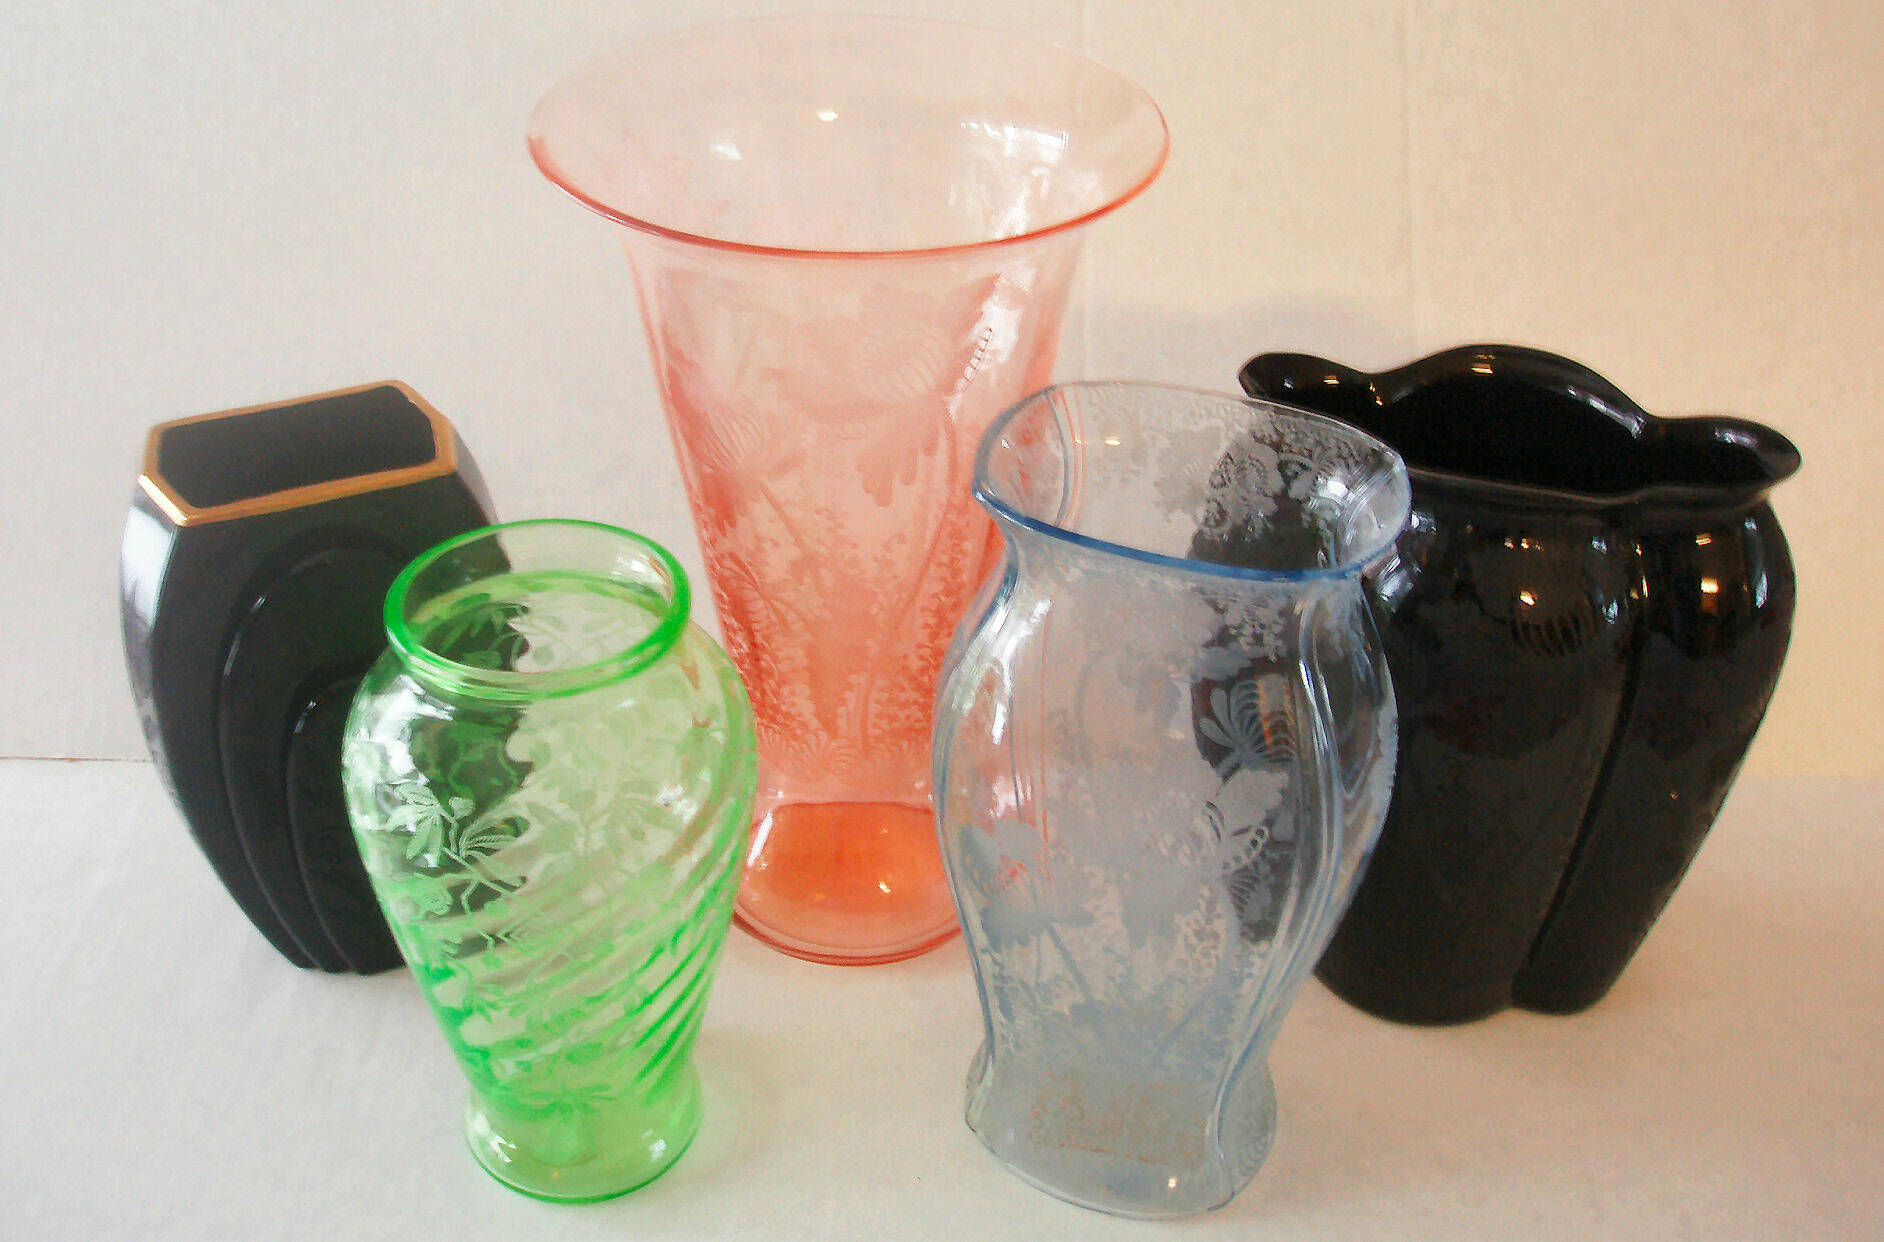 The Green River Glass Show and Sale is Saturday, Feb. 26 at Kent Commons. COURTESY PHOTO, Green River Glass Show and Sale